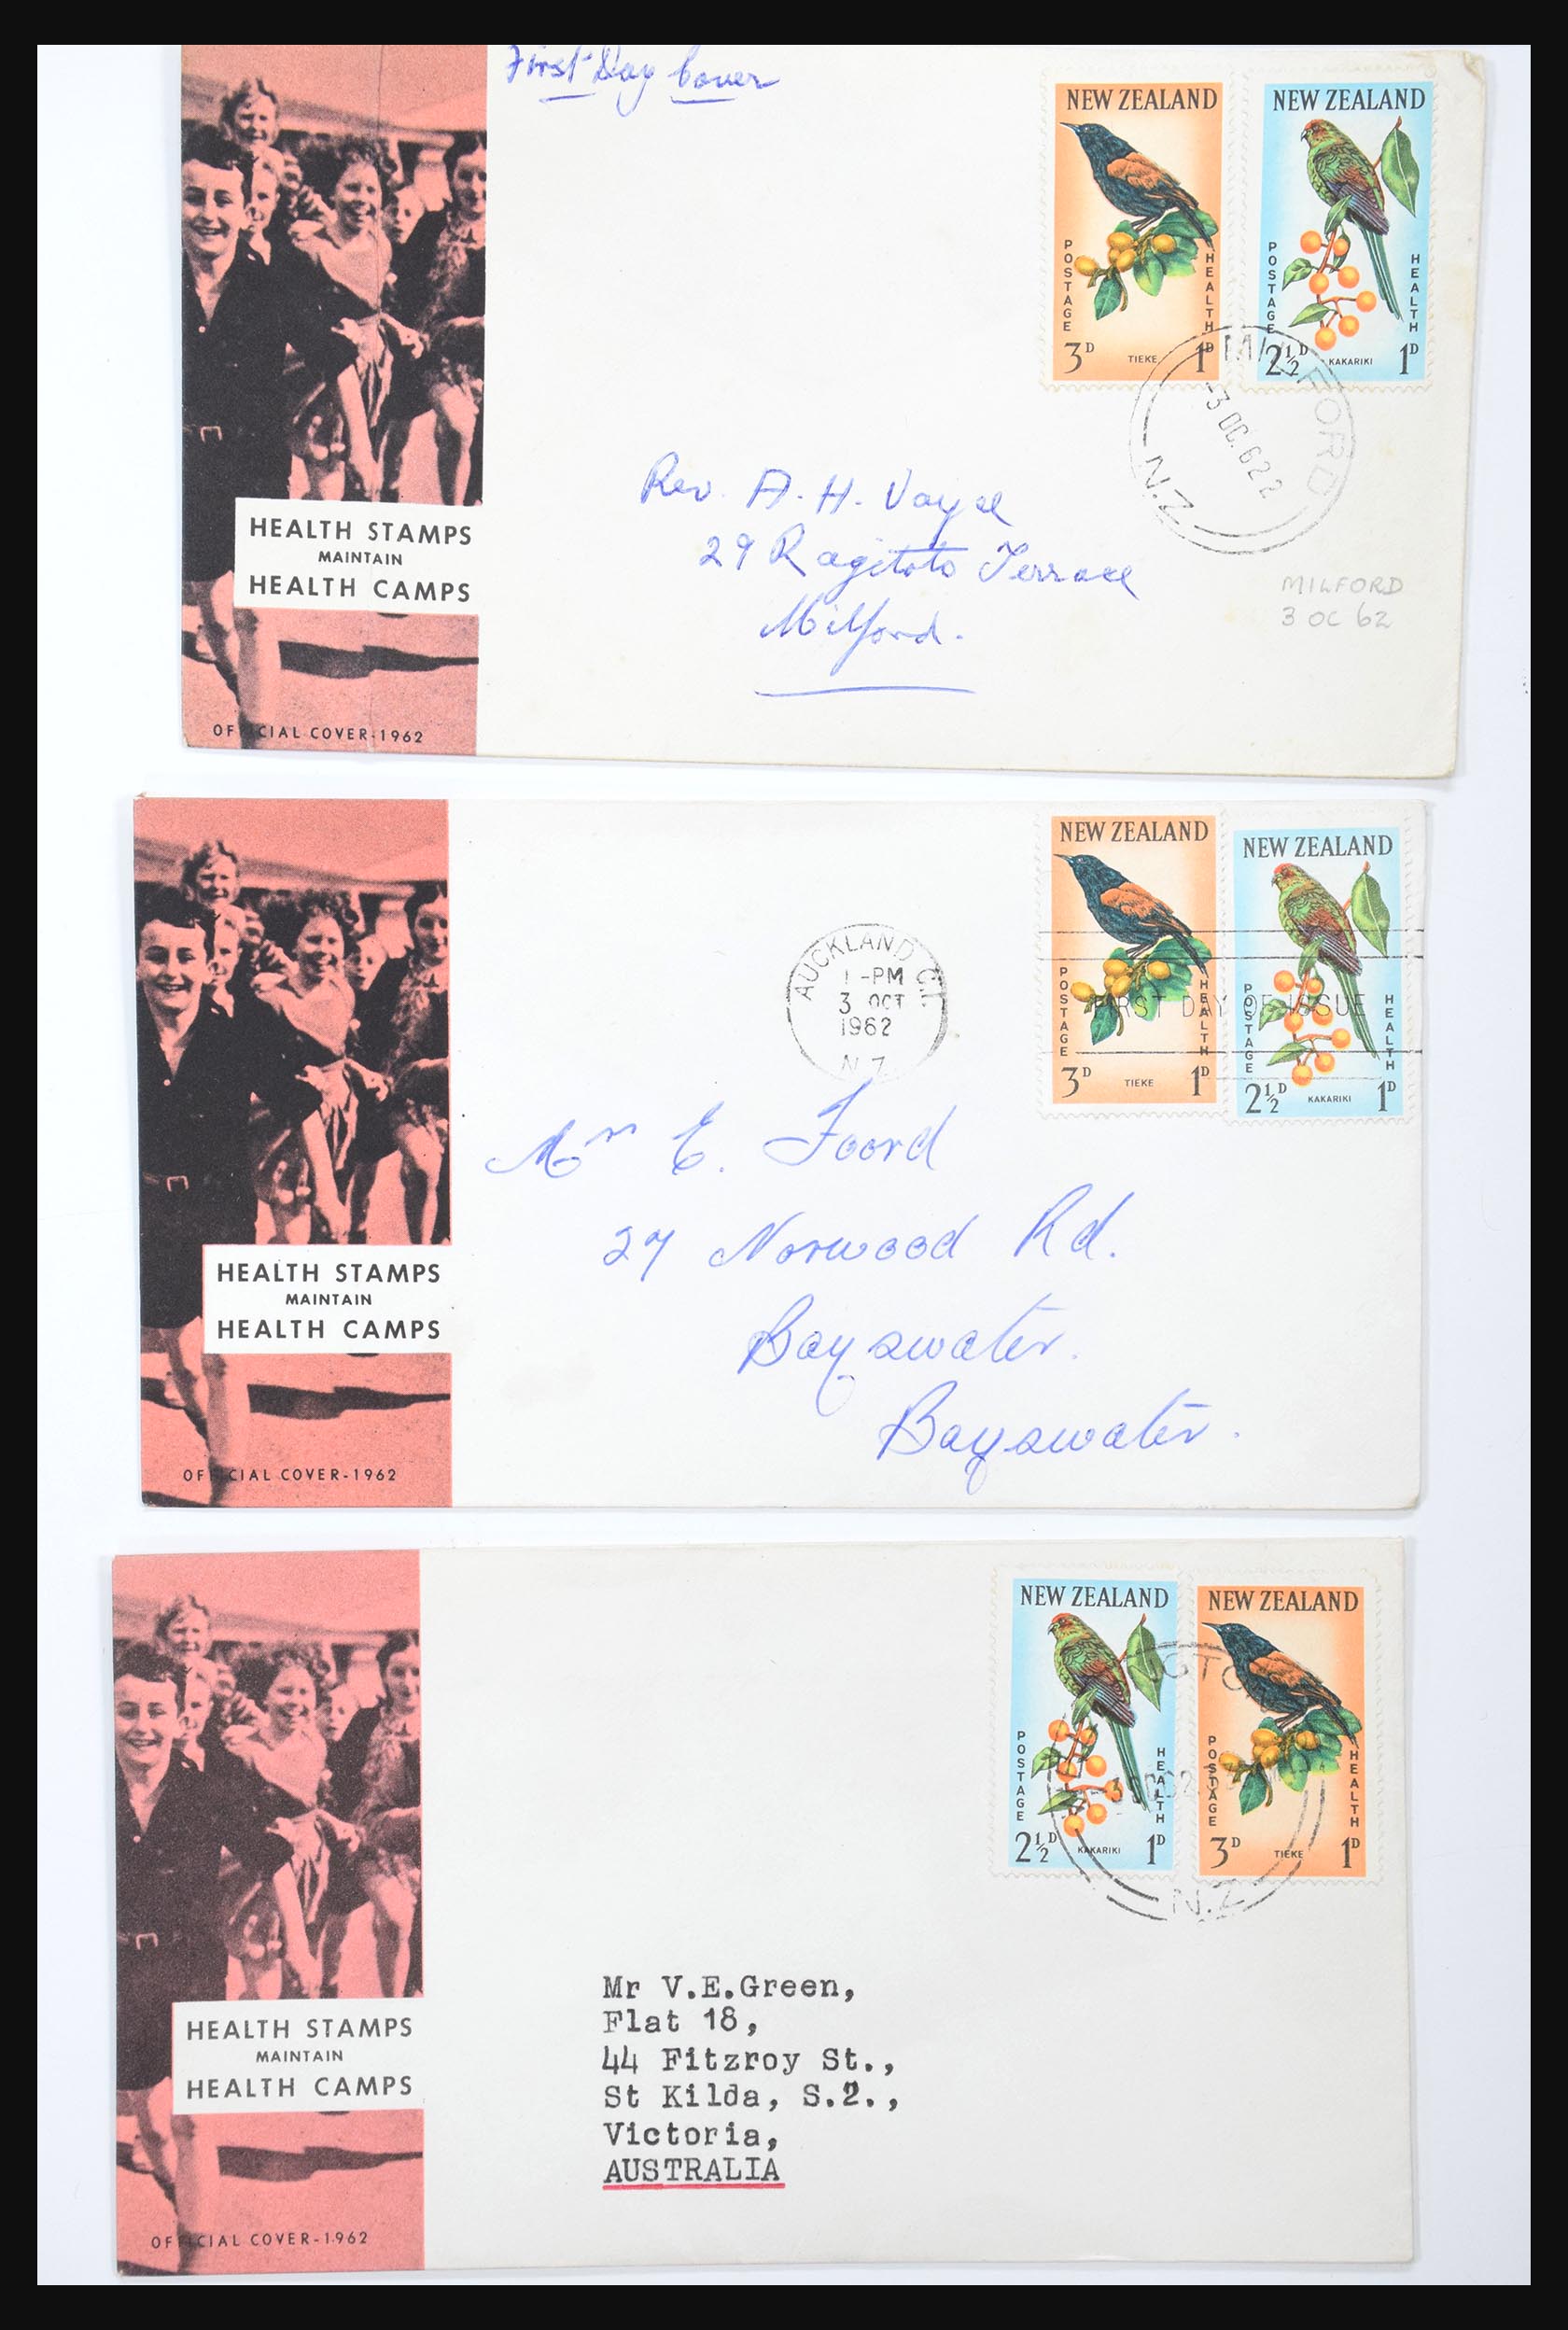 30821 034 - 30821 New Zealand FDC's 1960-1971.